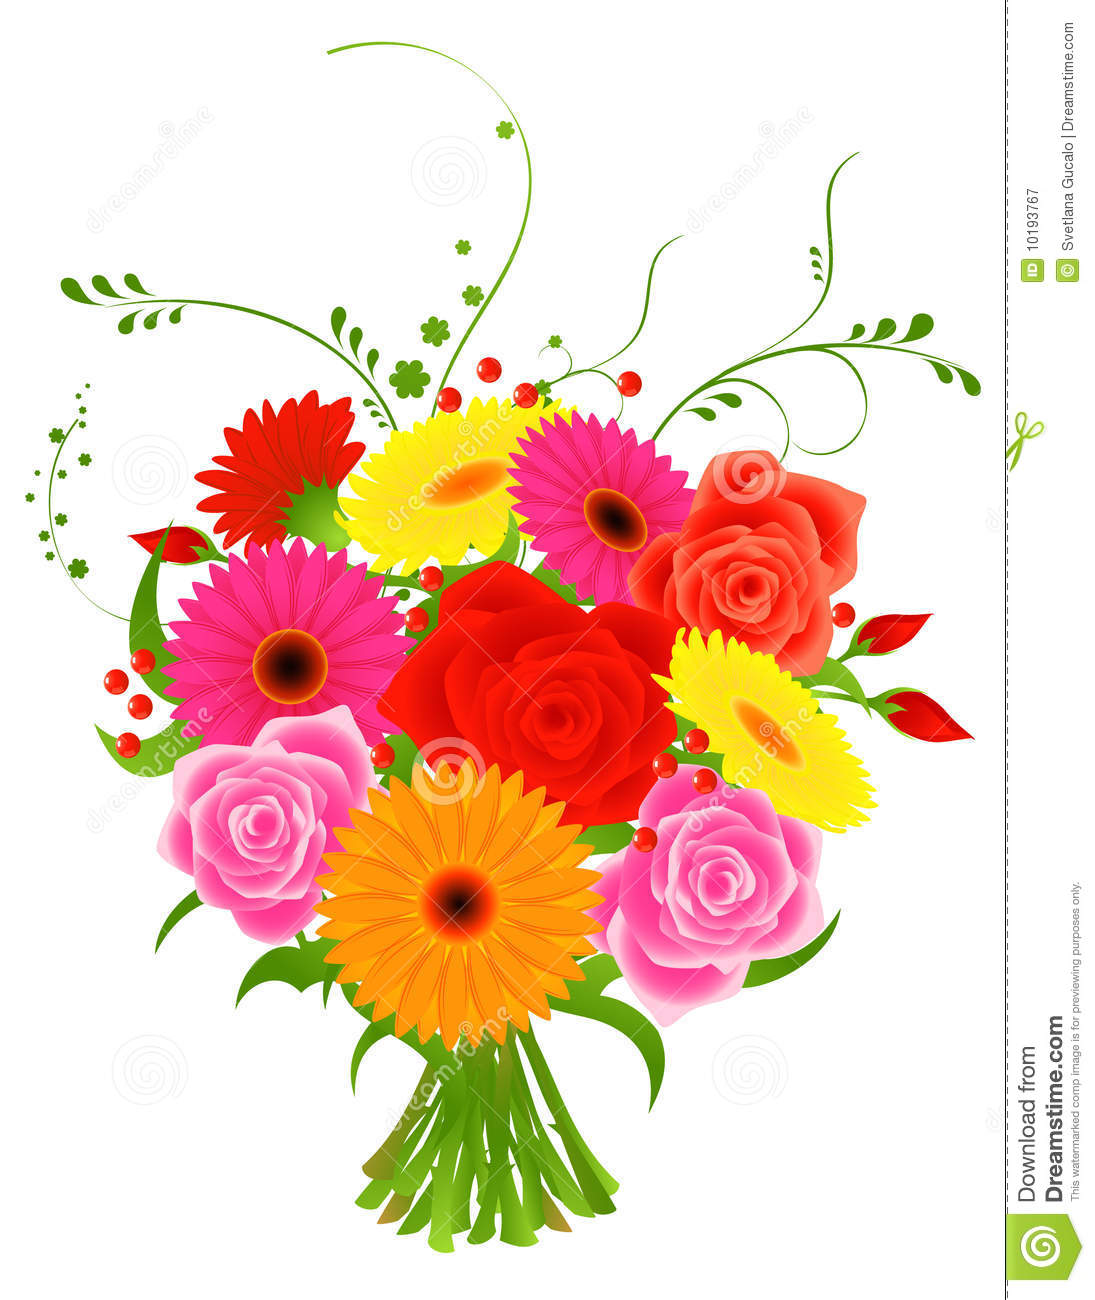 Bunch Of Flowers Royalty Free Stock Photography   Image  10193767